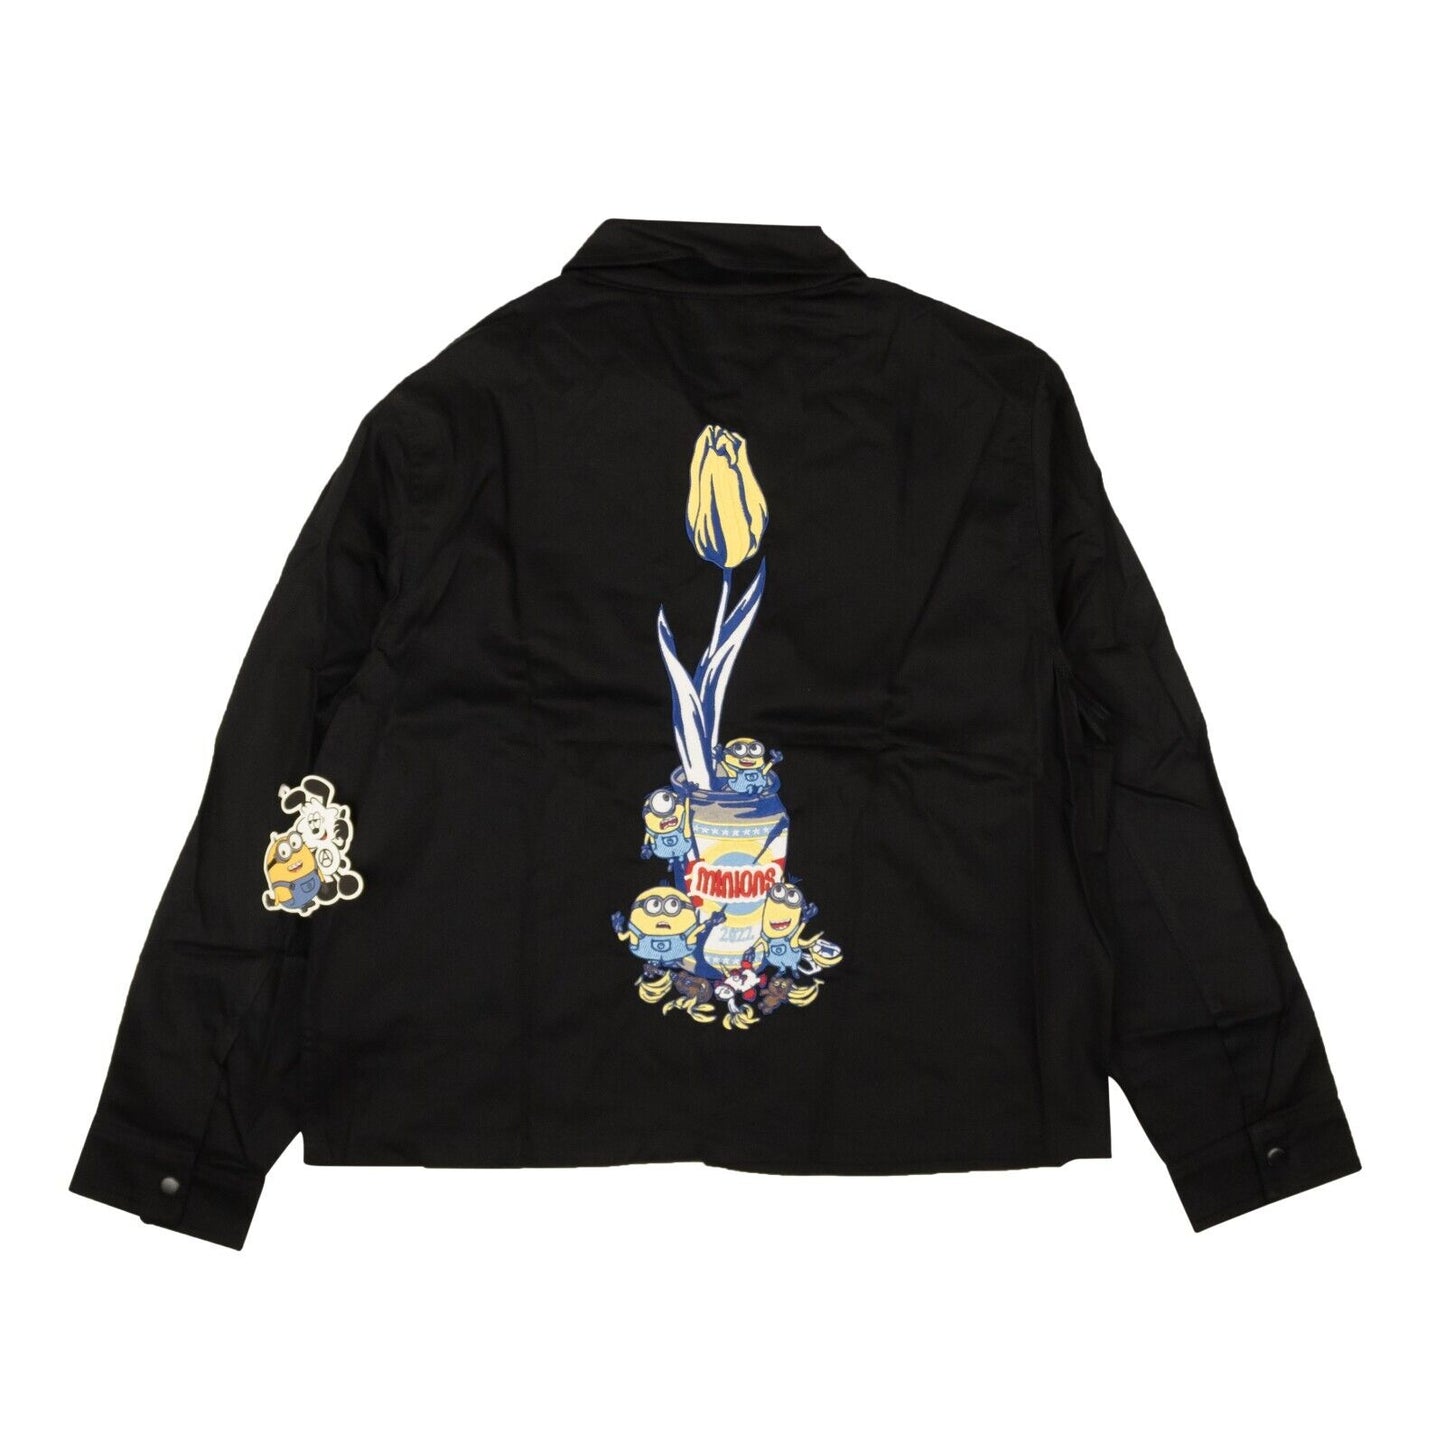 Complexcon Wasted Youth Minions X Jacket - Black